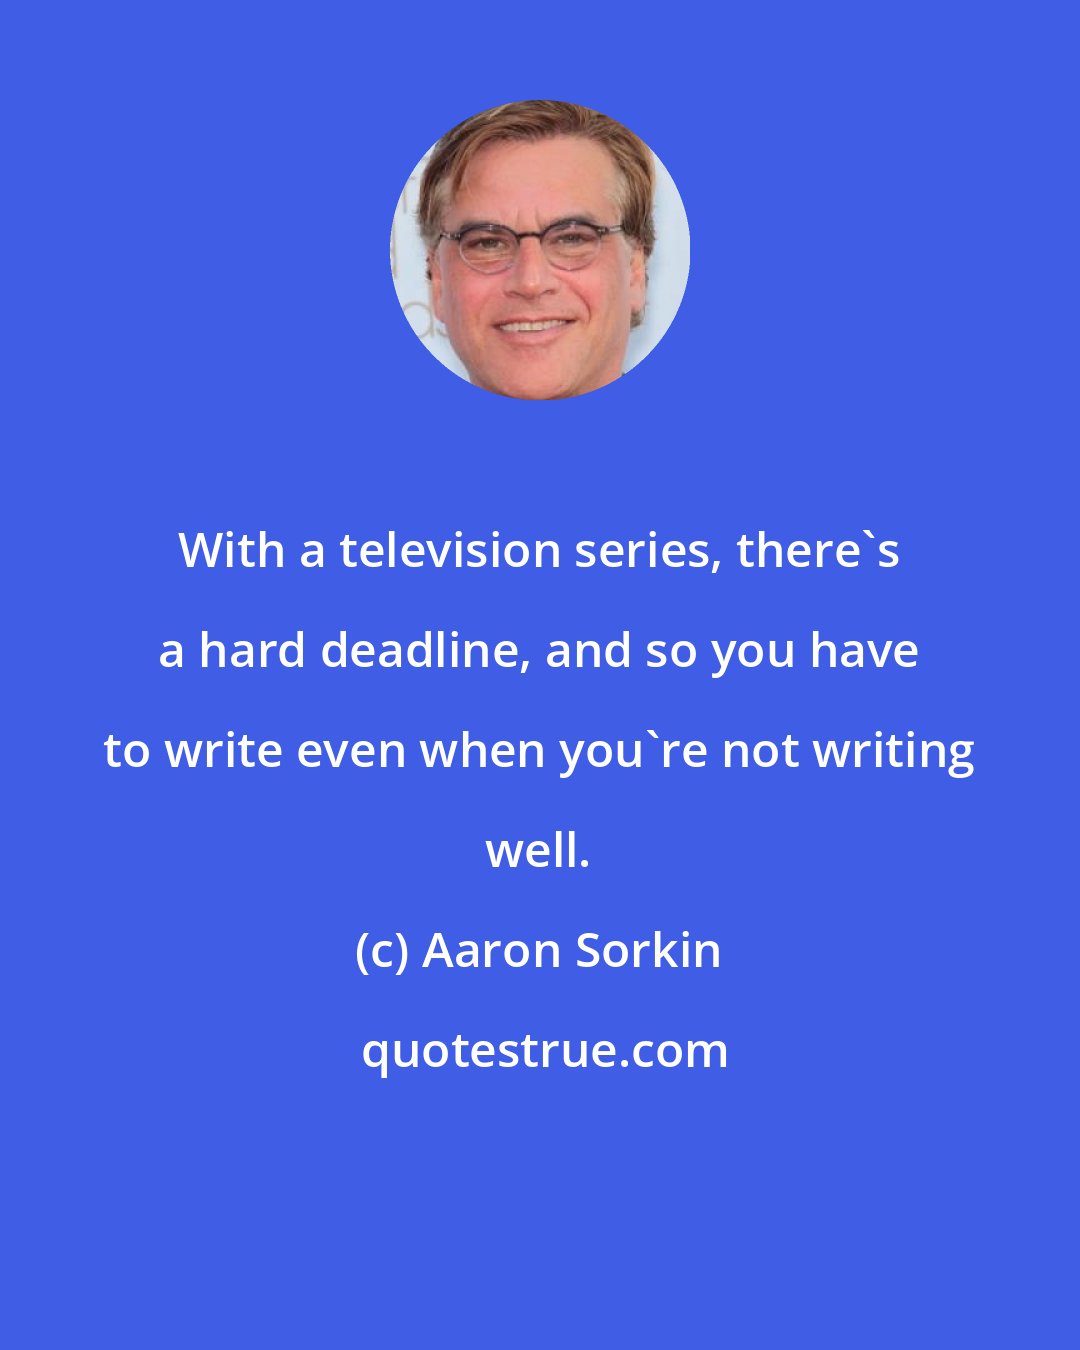 Aaron Sorkin: With a television series, there's a hard deadline, and so you have to write even when you're not writing well.